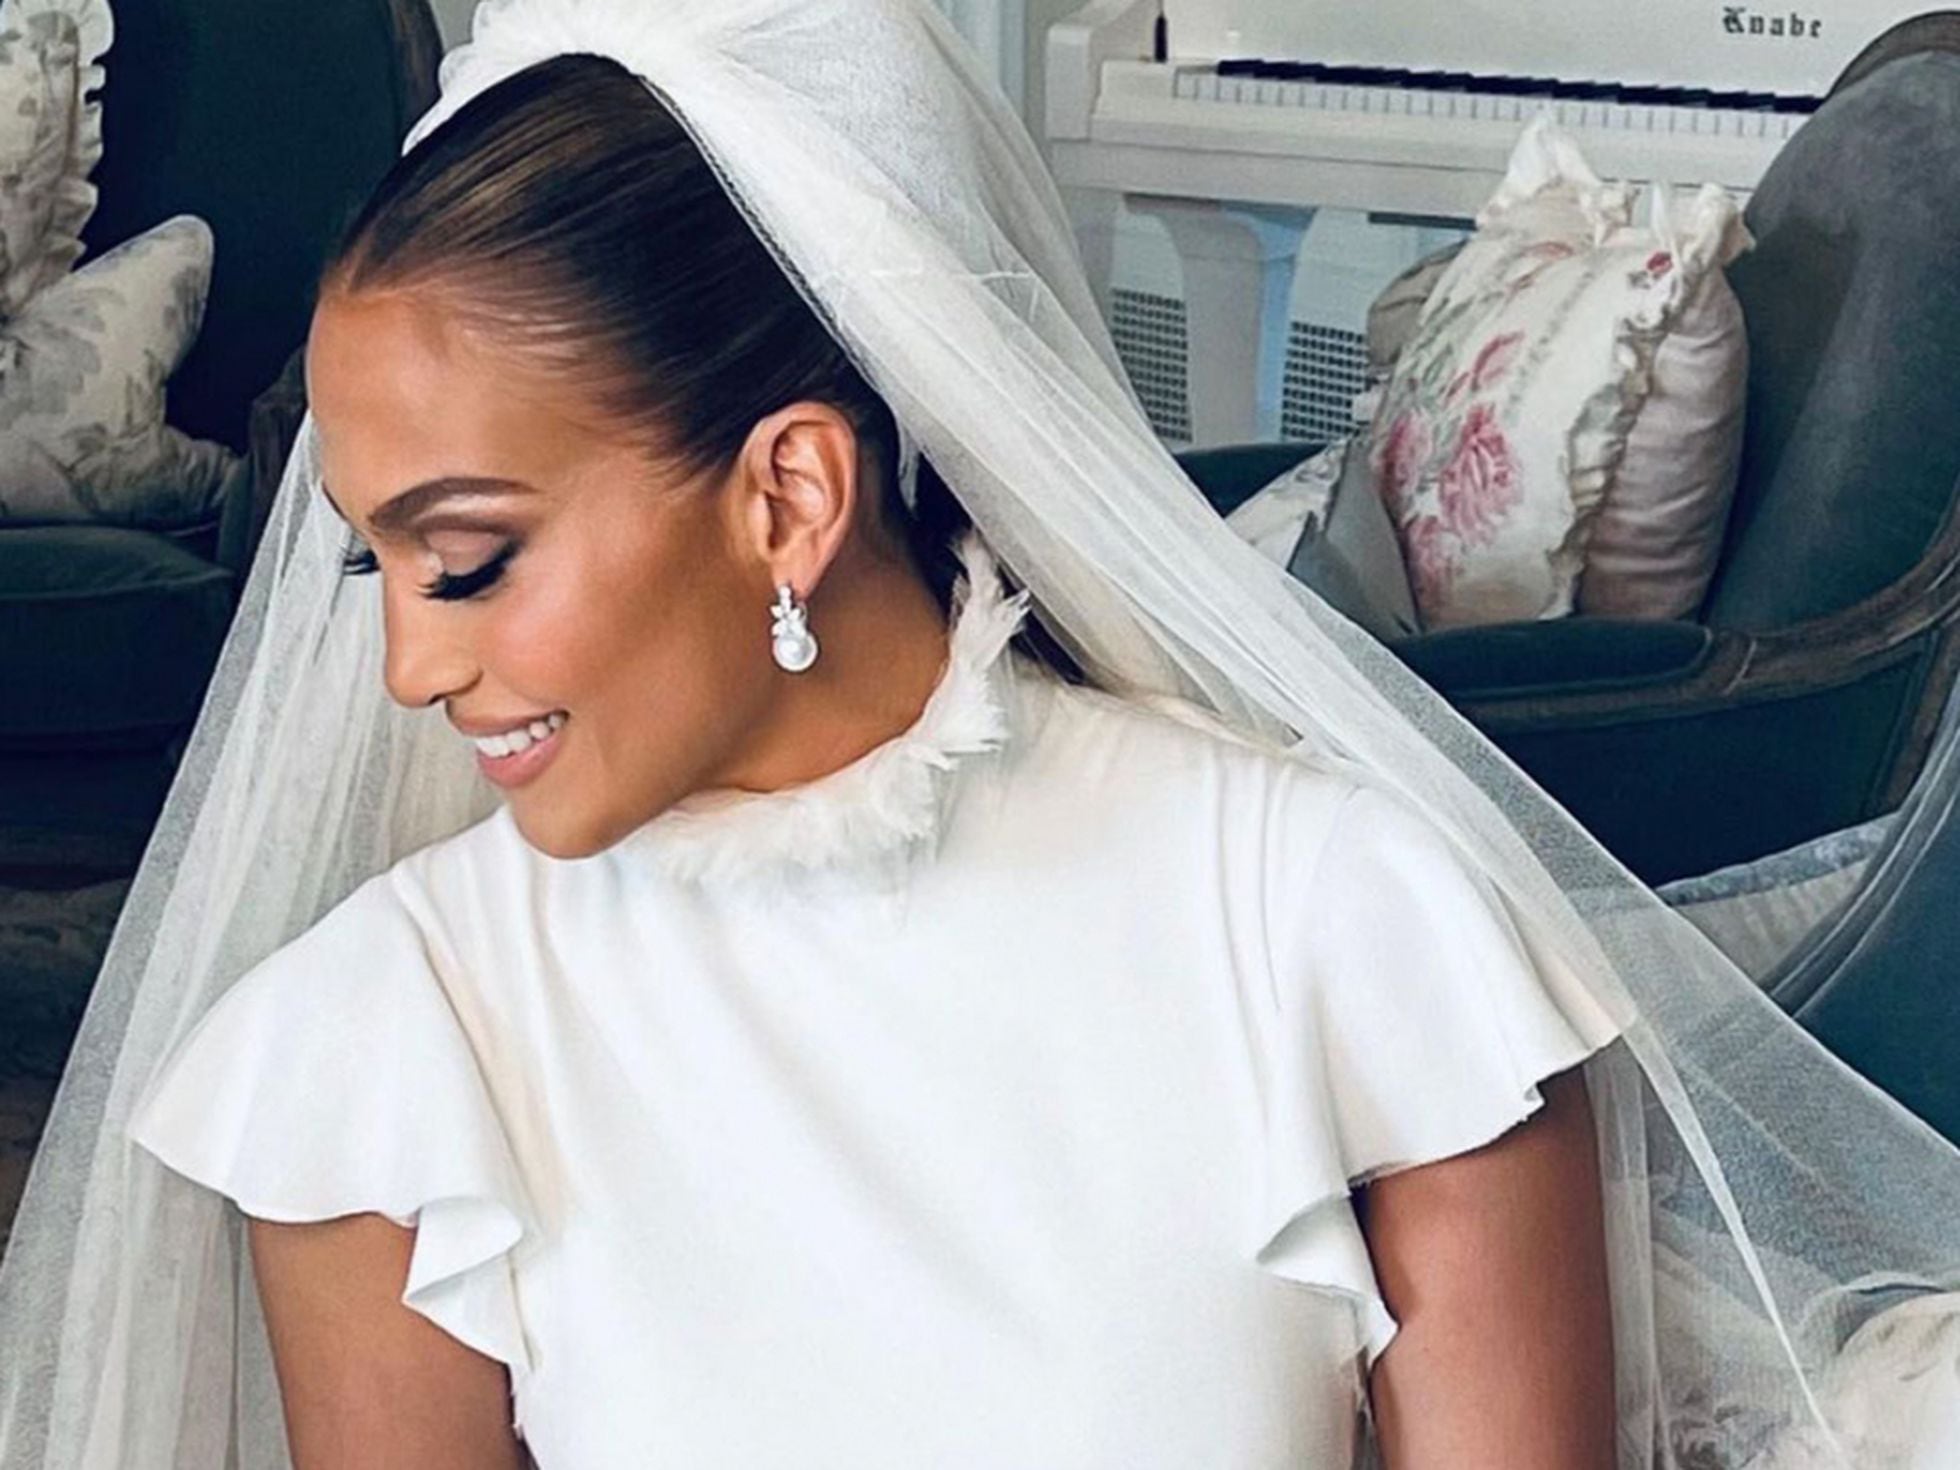 Lauren and Lopez: The most surprising union of JLO's wedding day | Culture  | EL PAÍS English